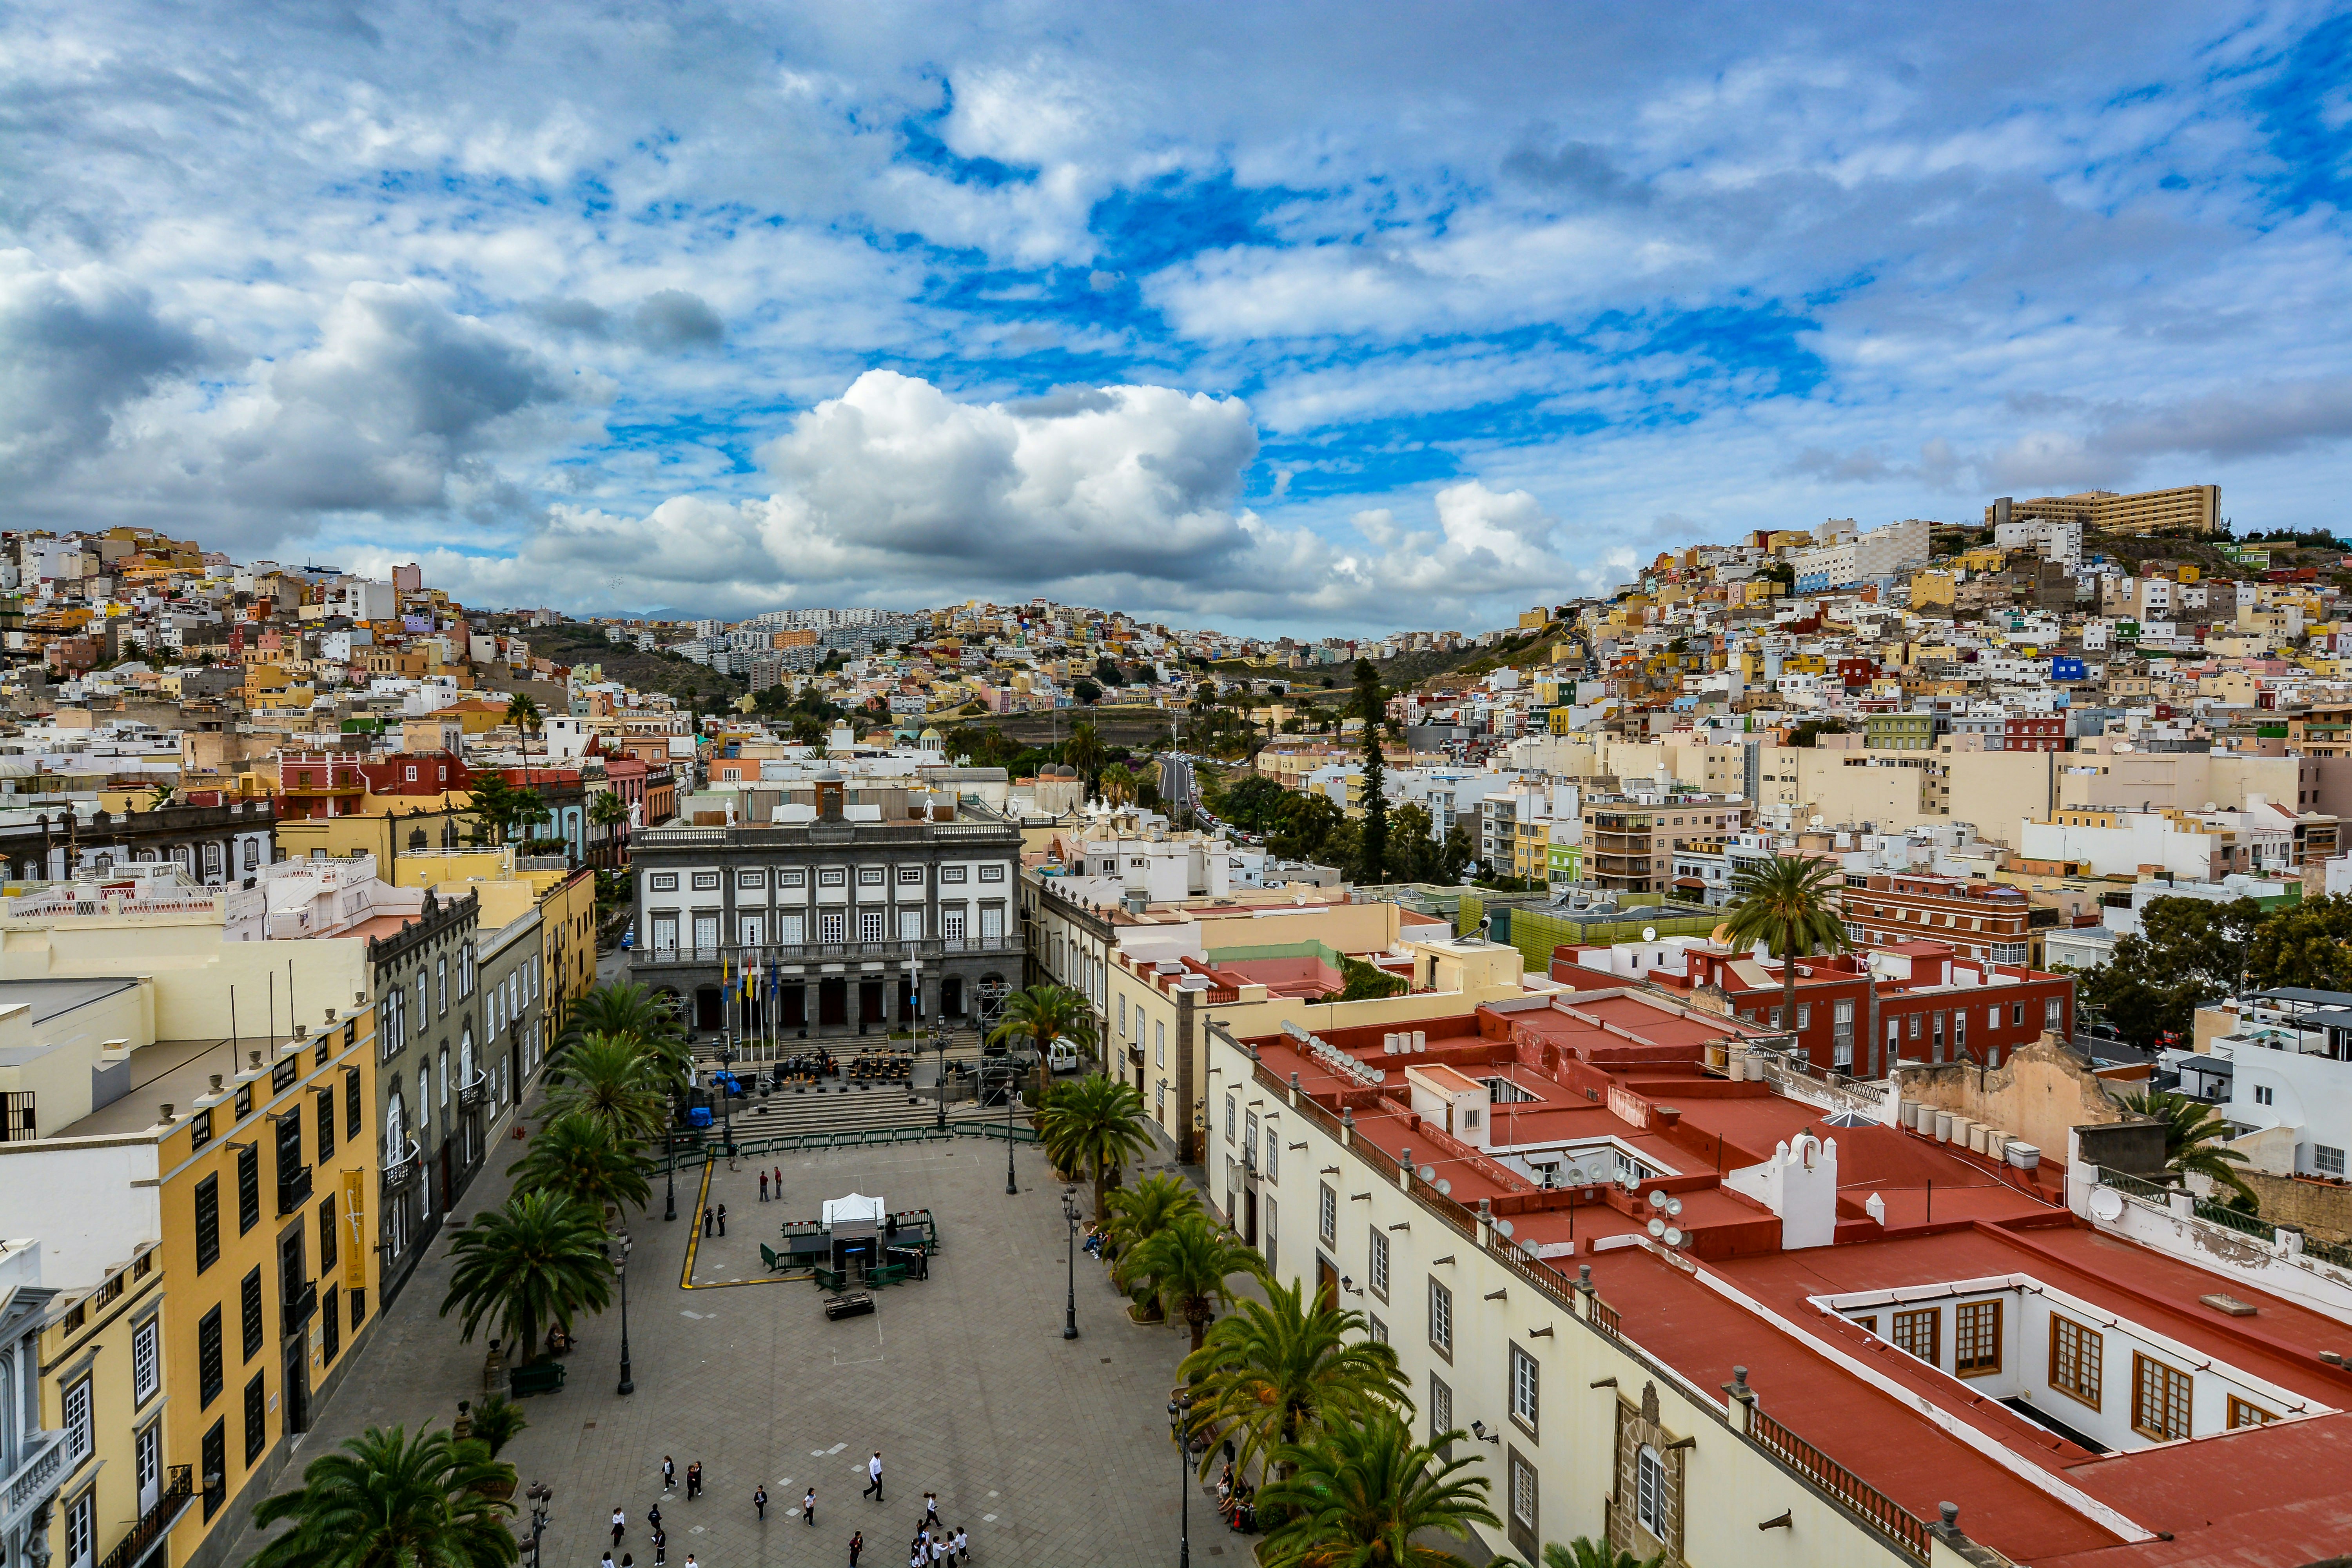 Looking over a palm-tree-lined square surrounded by colorful flat-roofed buildings in Las Palmas de Gran Canaria, Canary Islands